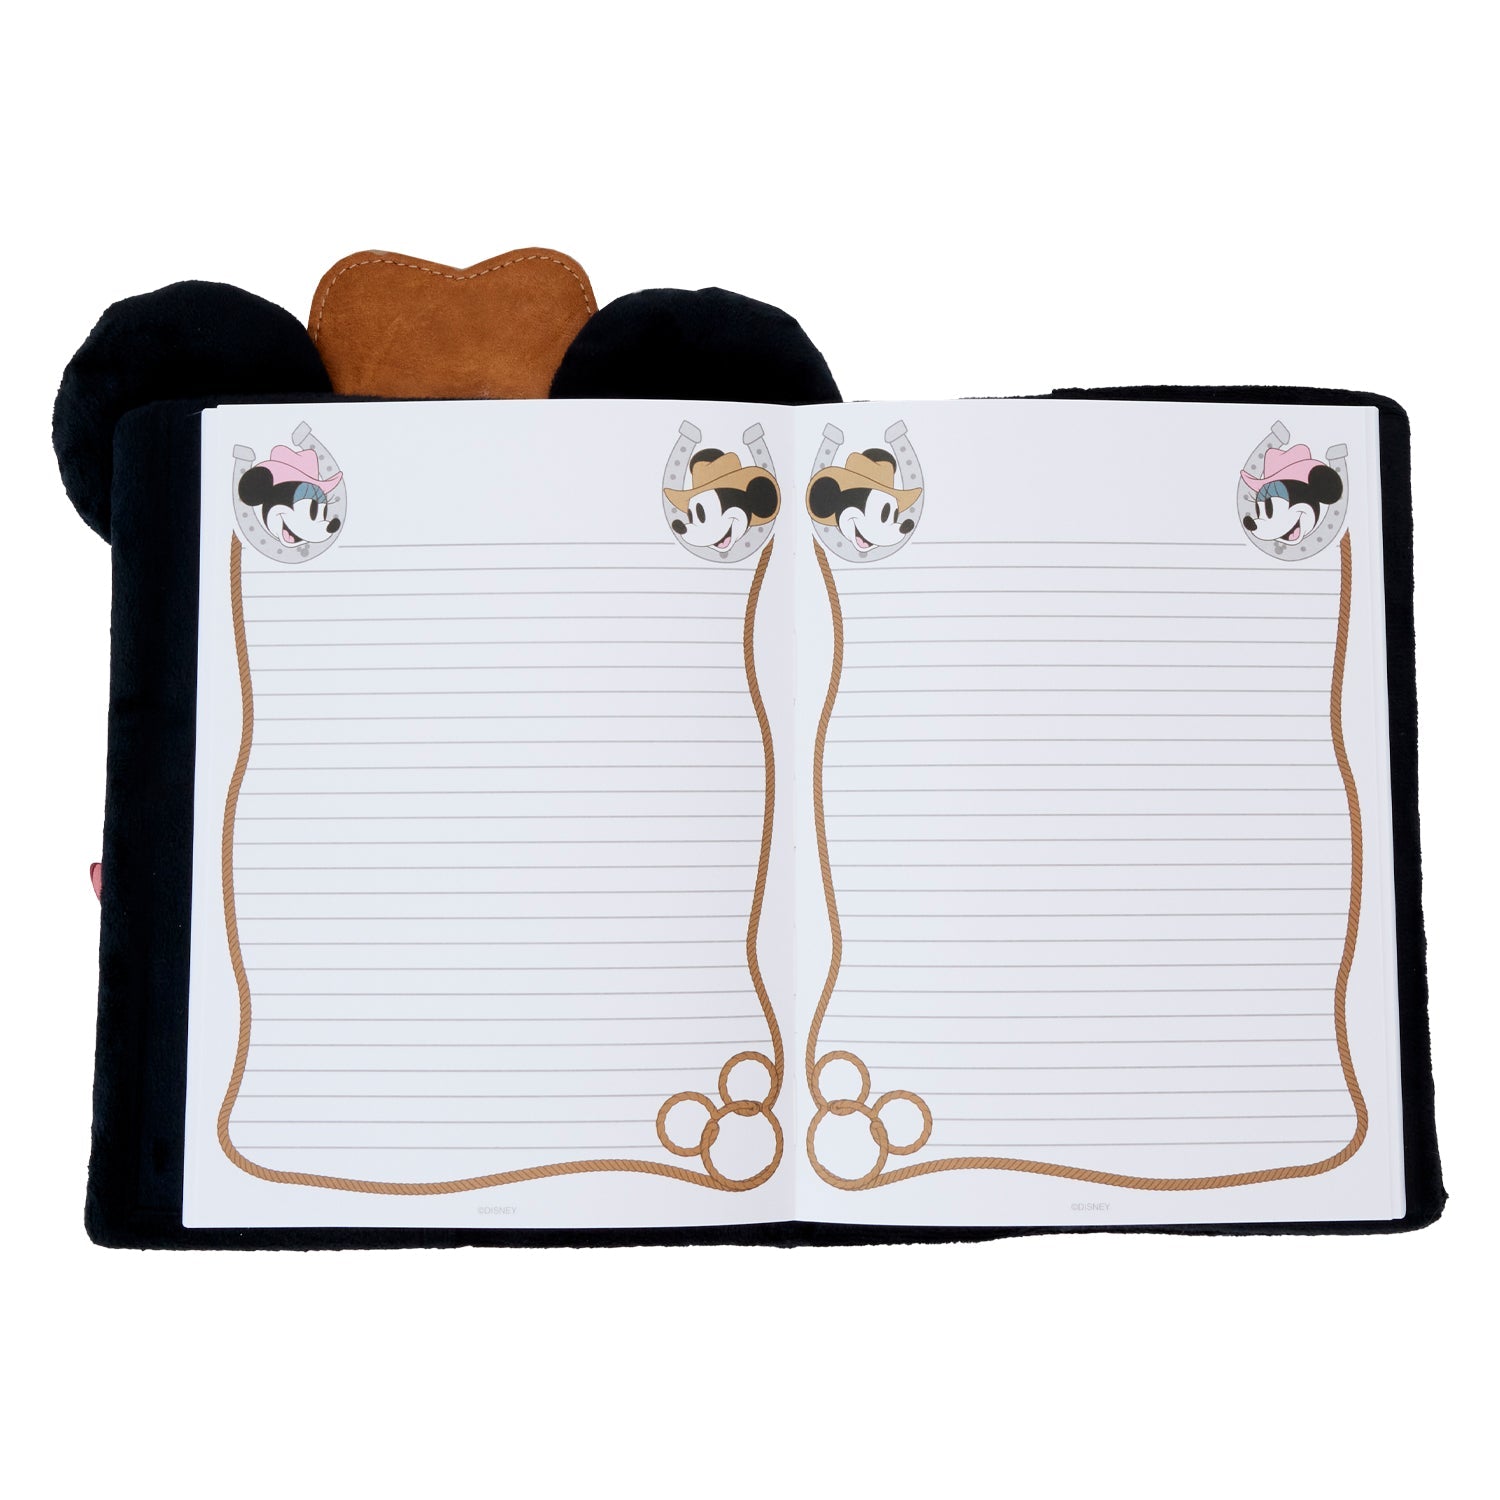 Loungefly x Disney Western Mickey Mouse Plush Journal - GeekCore